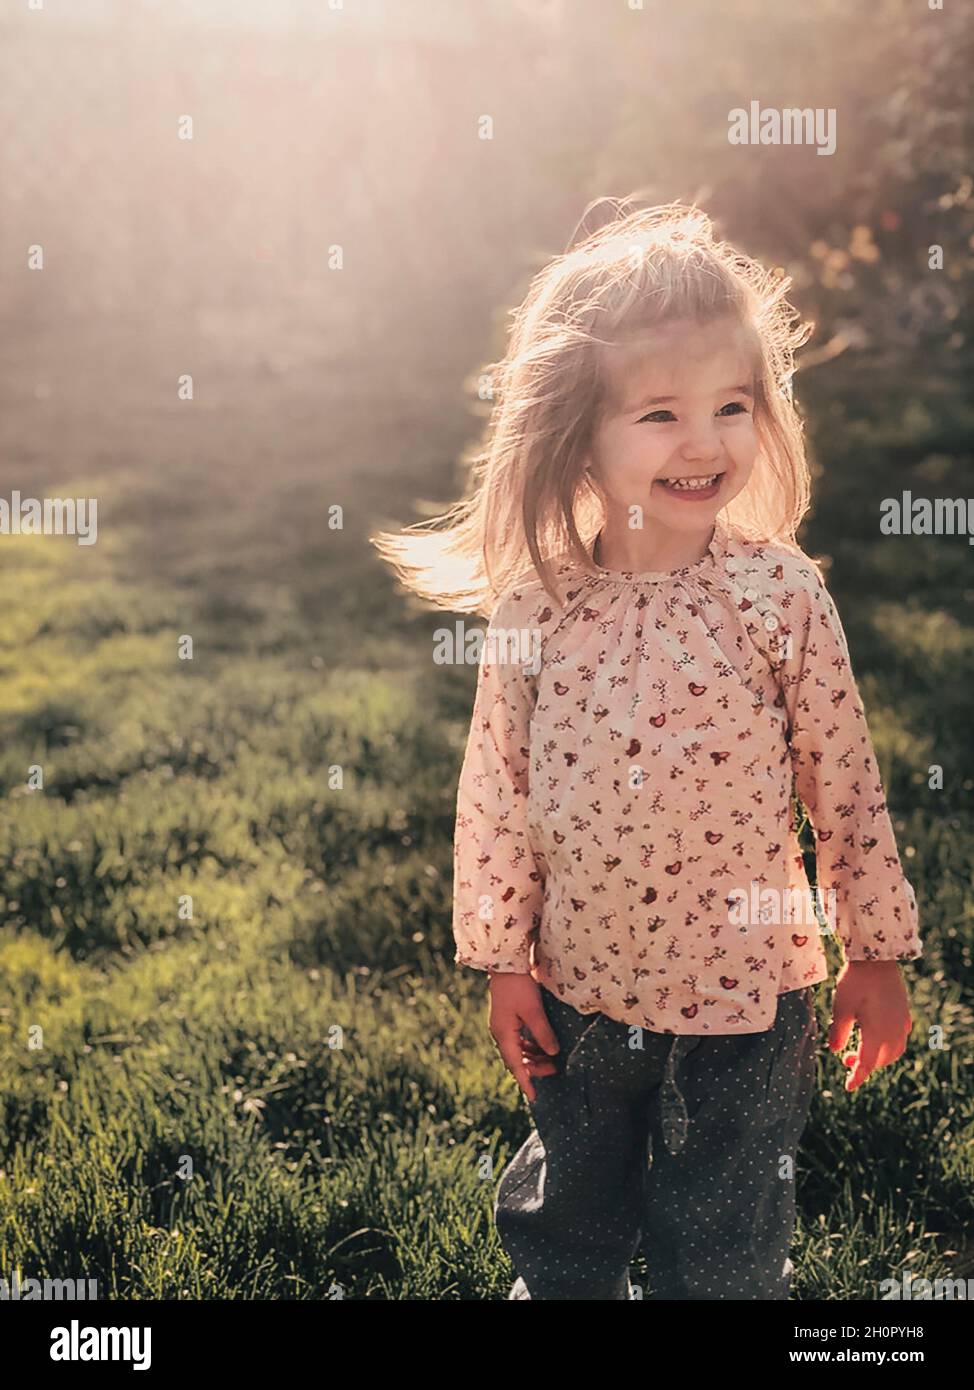 Close up photo of smiling cute little girl of 3-4 years old with blond fluffy hair stands outdoor in bright warm sunlight against backdrop of spring n Stock Photo